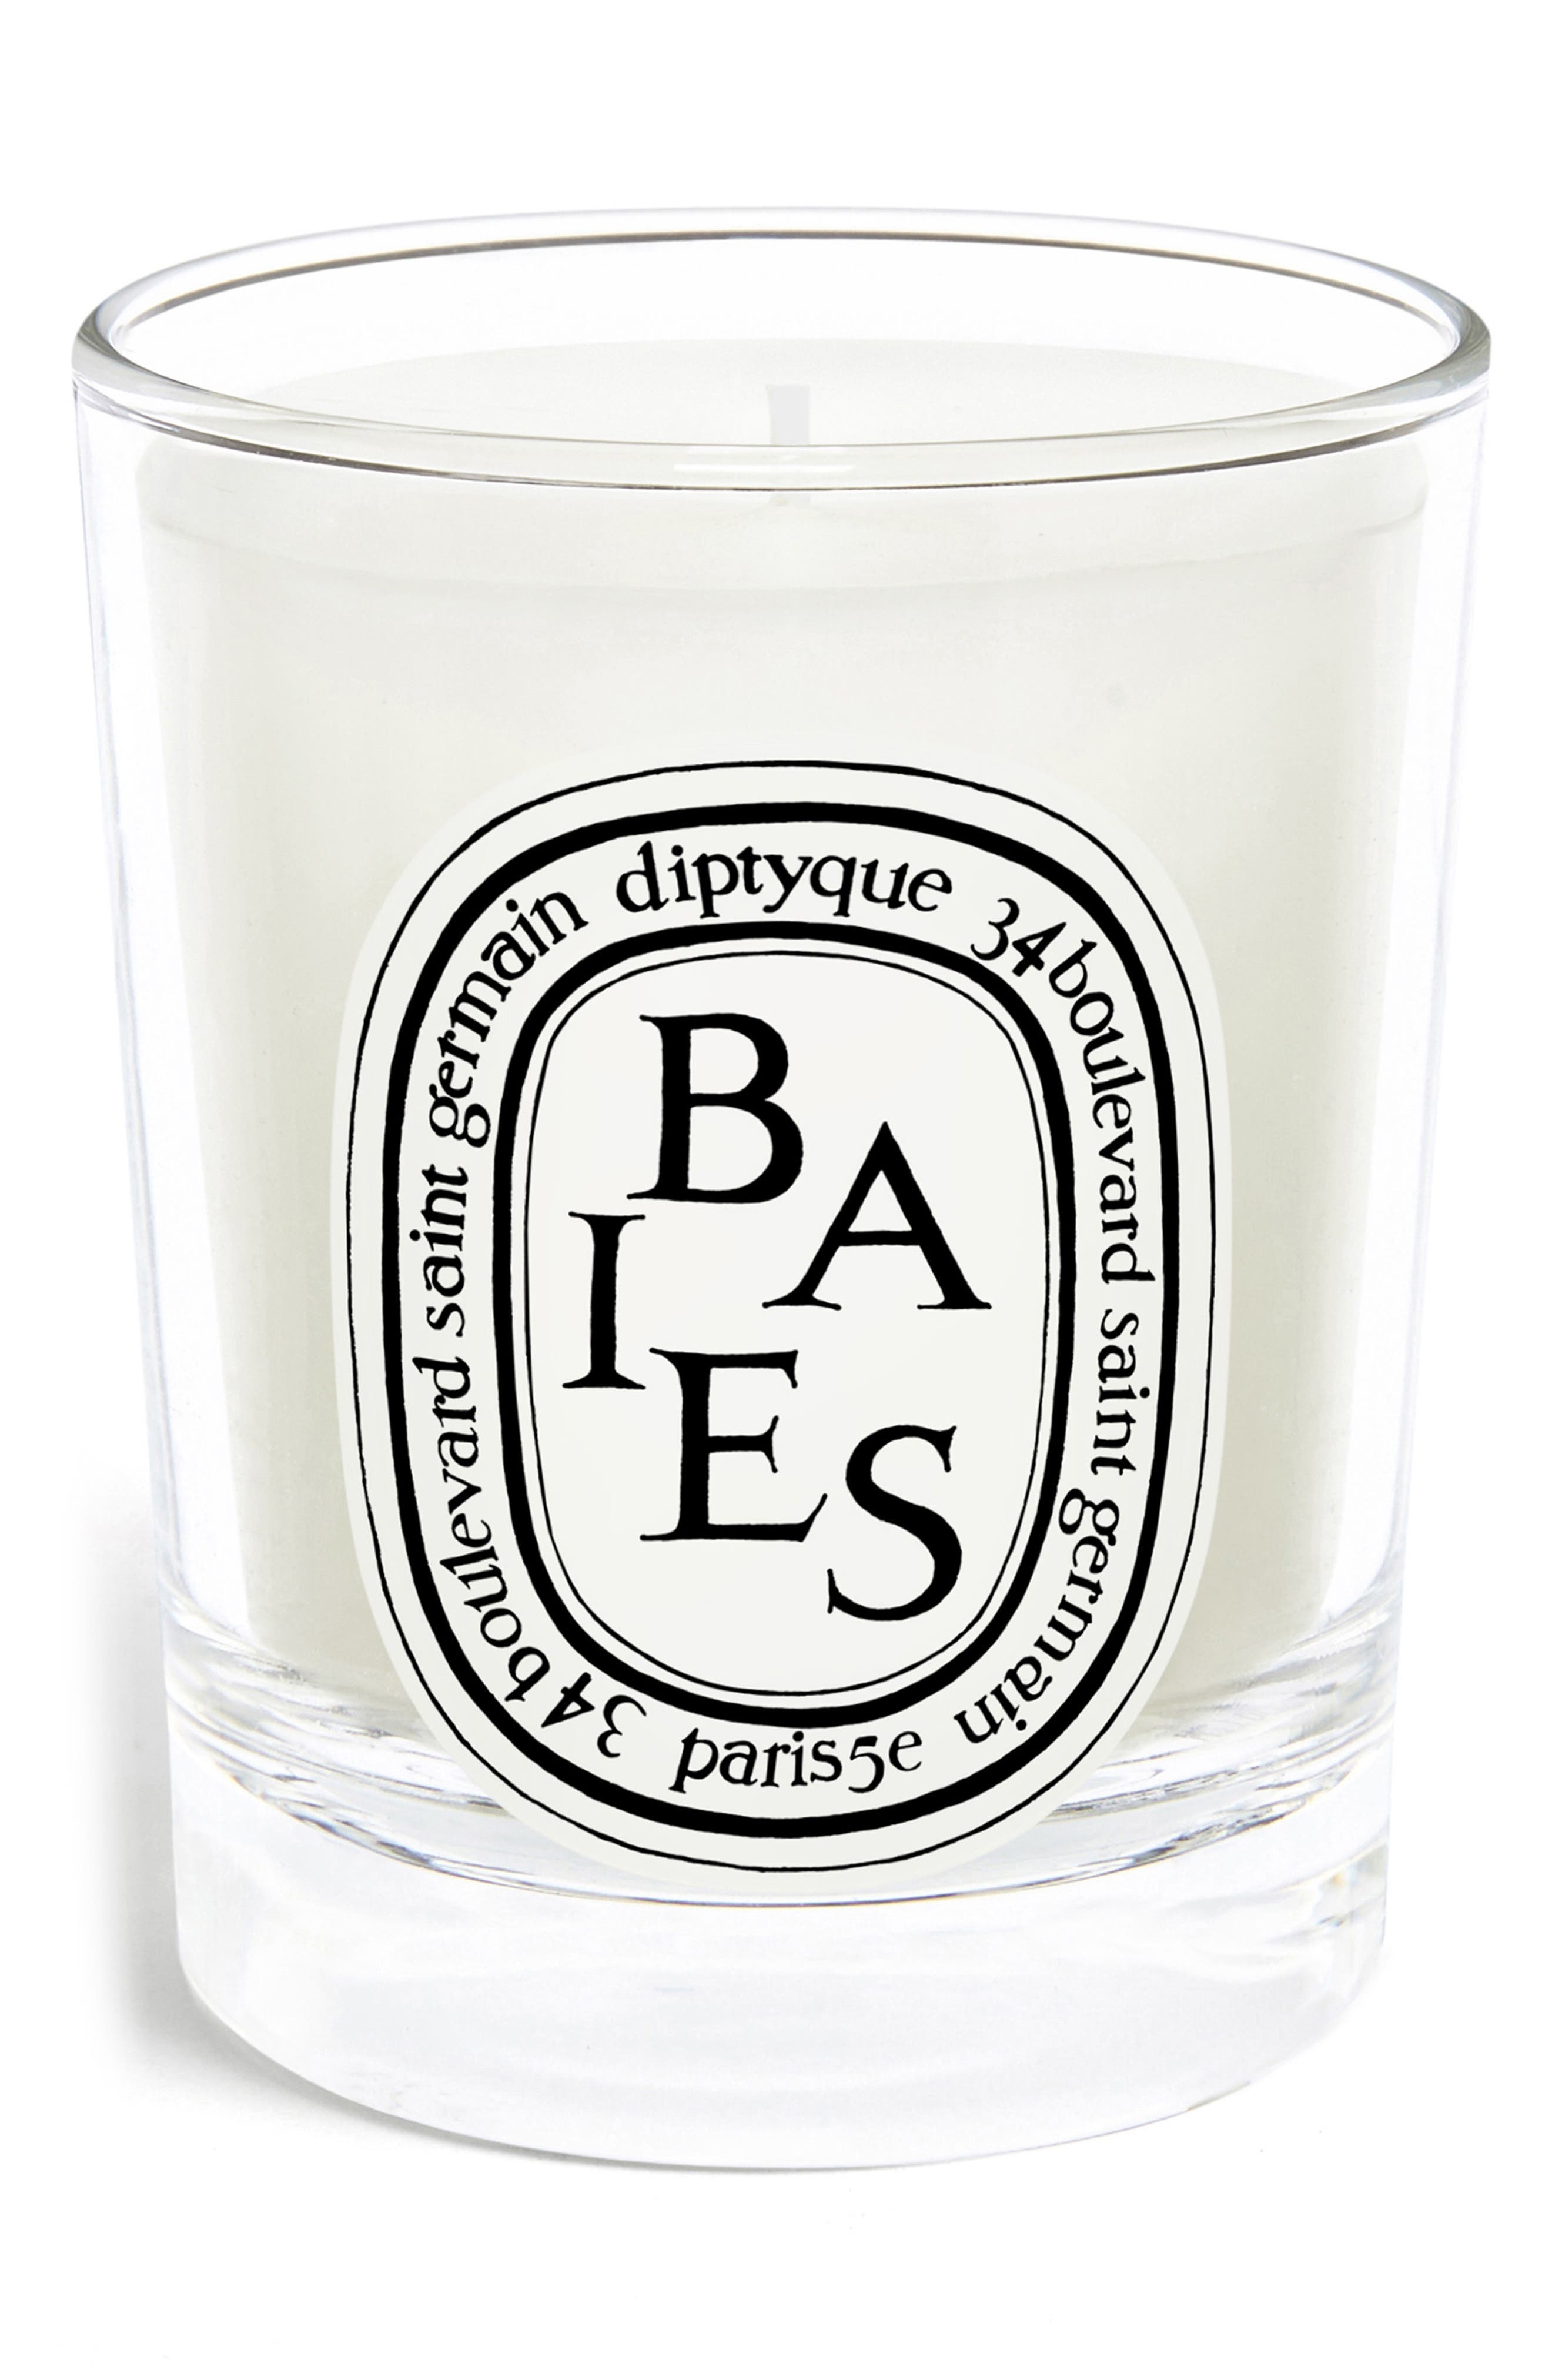 Diptyque BAIES Candle 2.4oz 70g Fresh Roses Berries 